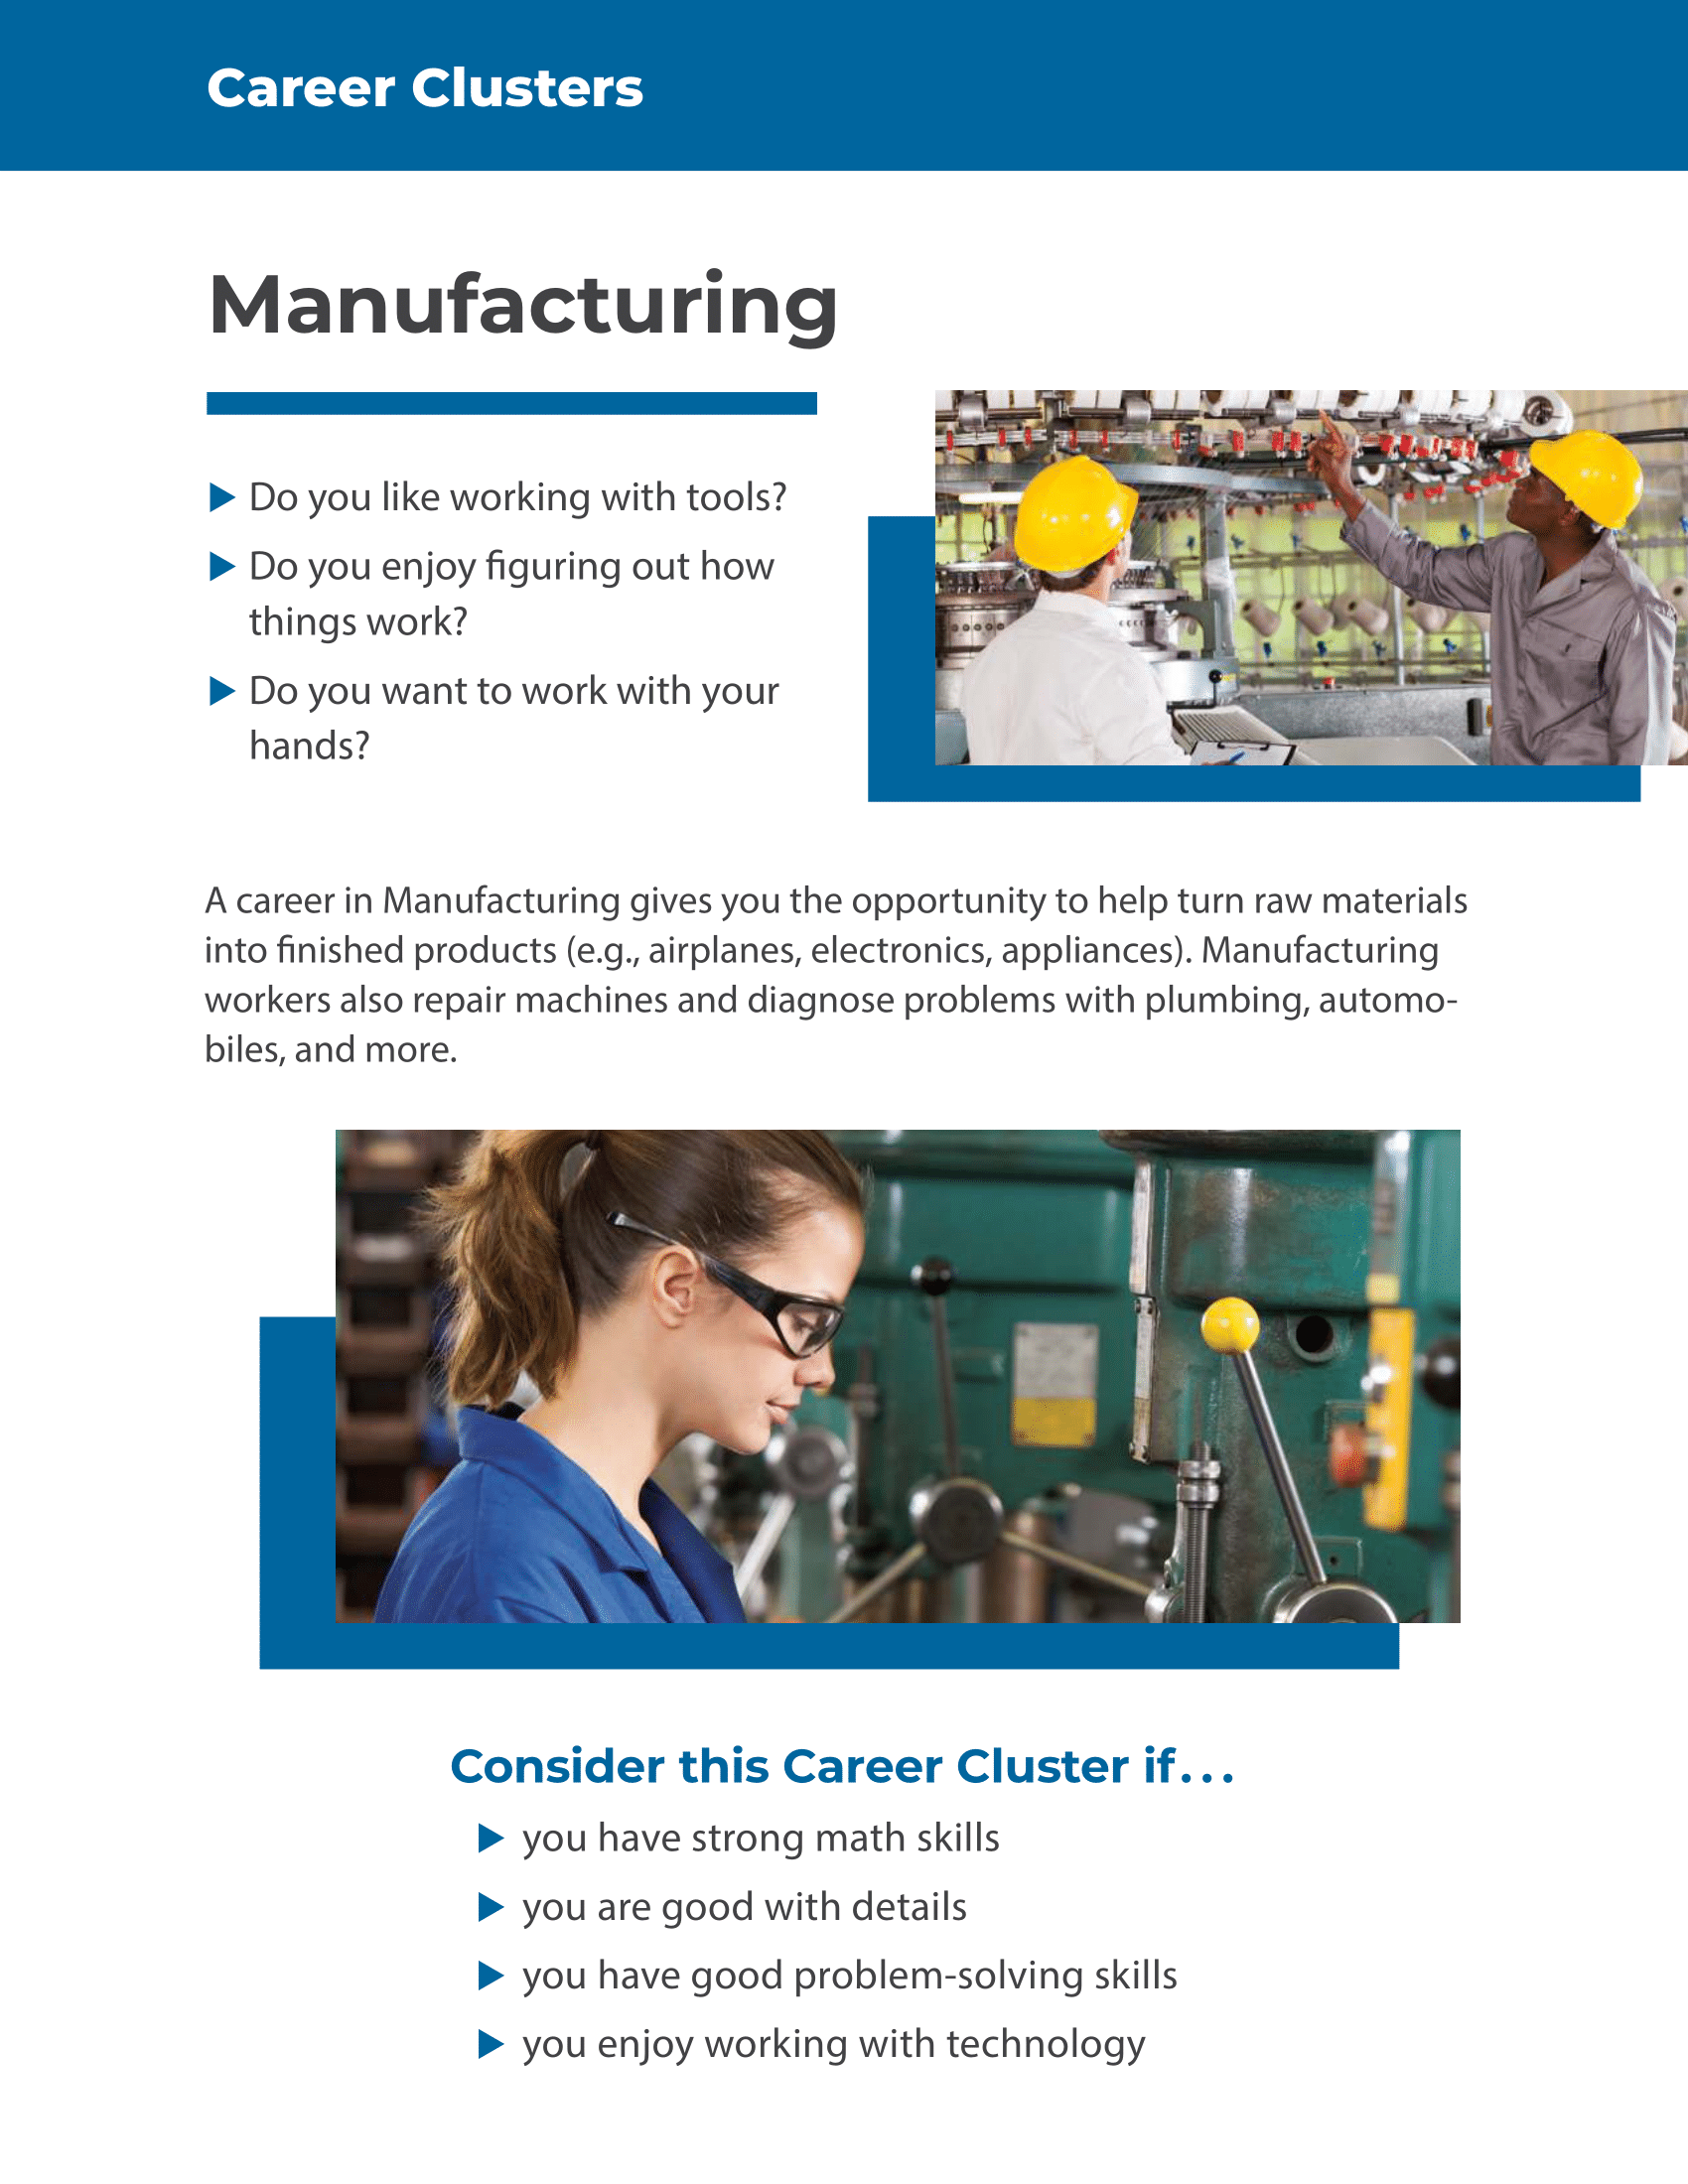 Career Clusters - Manufacturing